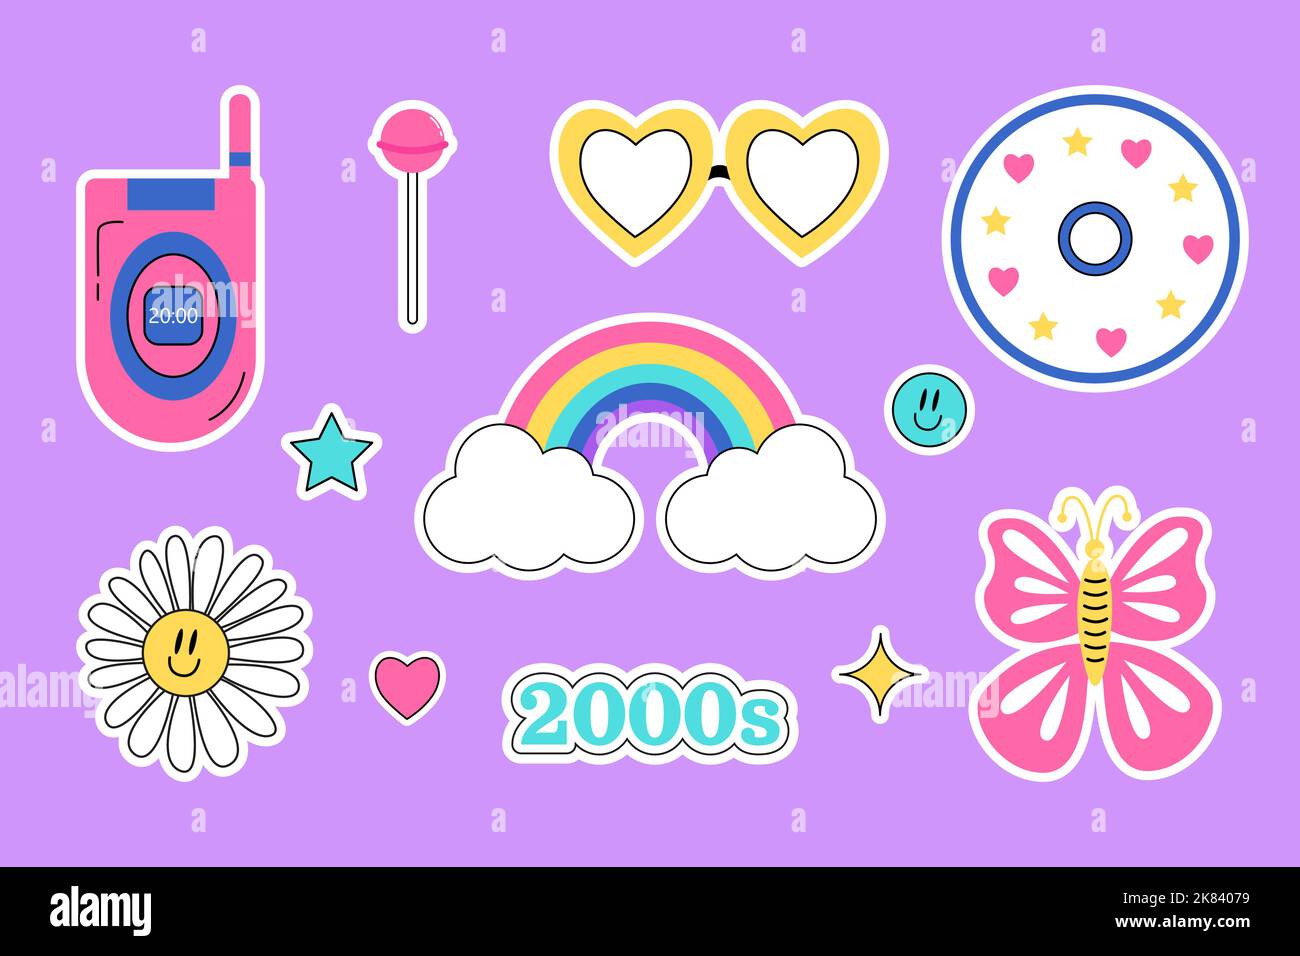 2000 psychedelic set stickers. Trippy daisy, rainbow, smile, lollypop, stars, butterfly, compact disc, mobile phone, glasses on purple background. Y2k Stock Vector